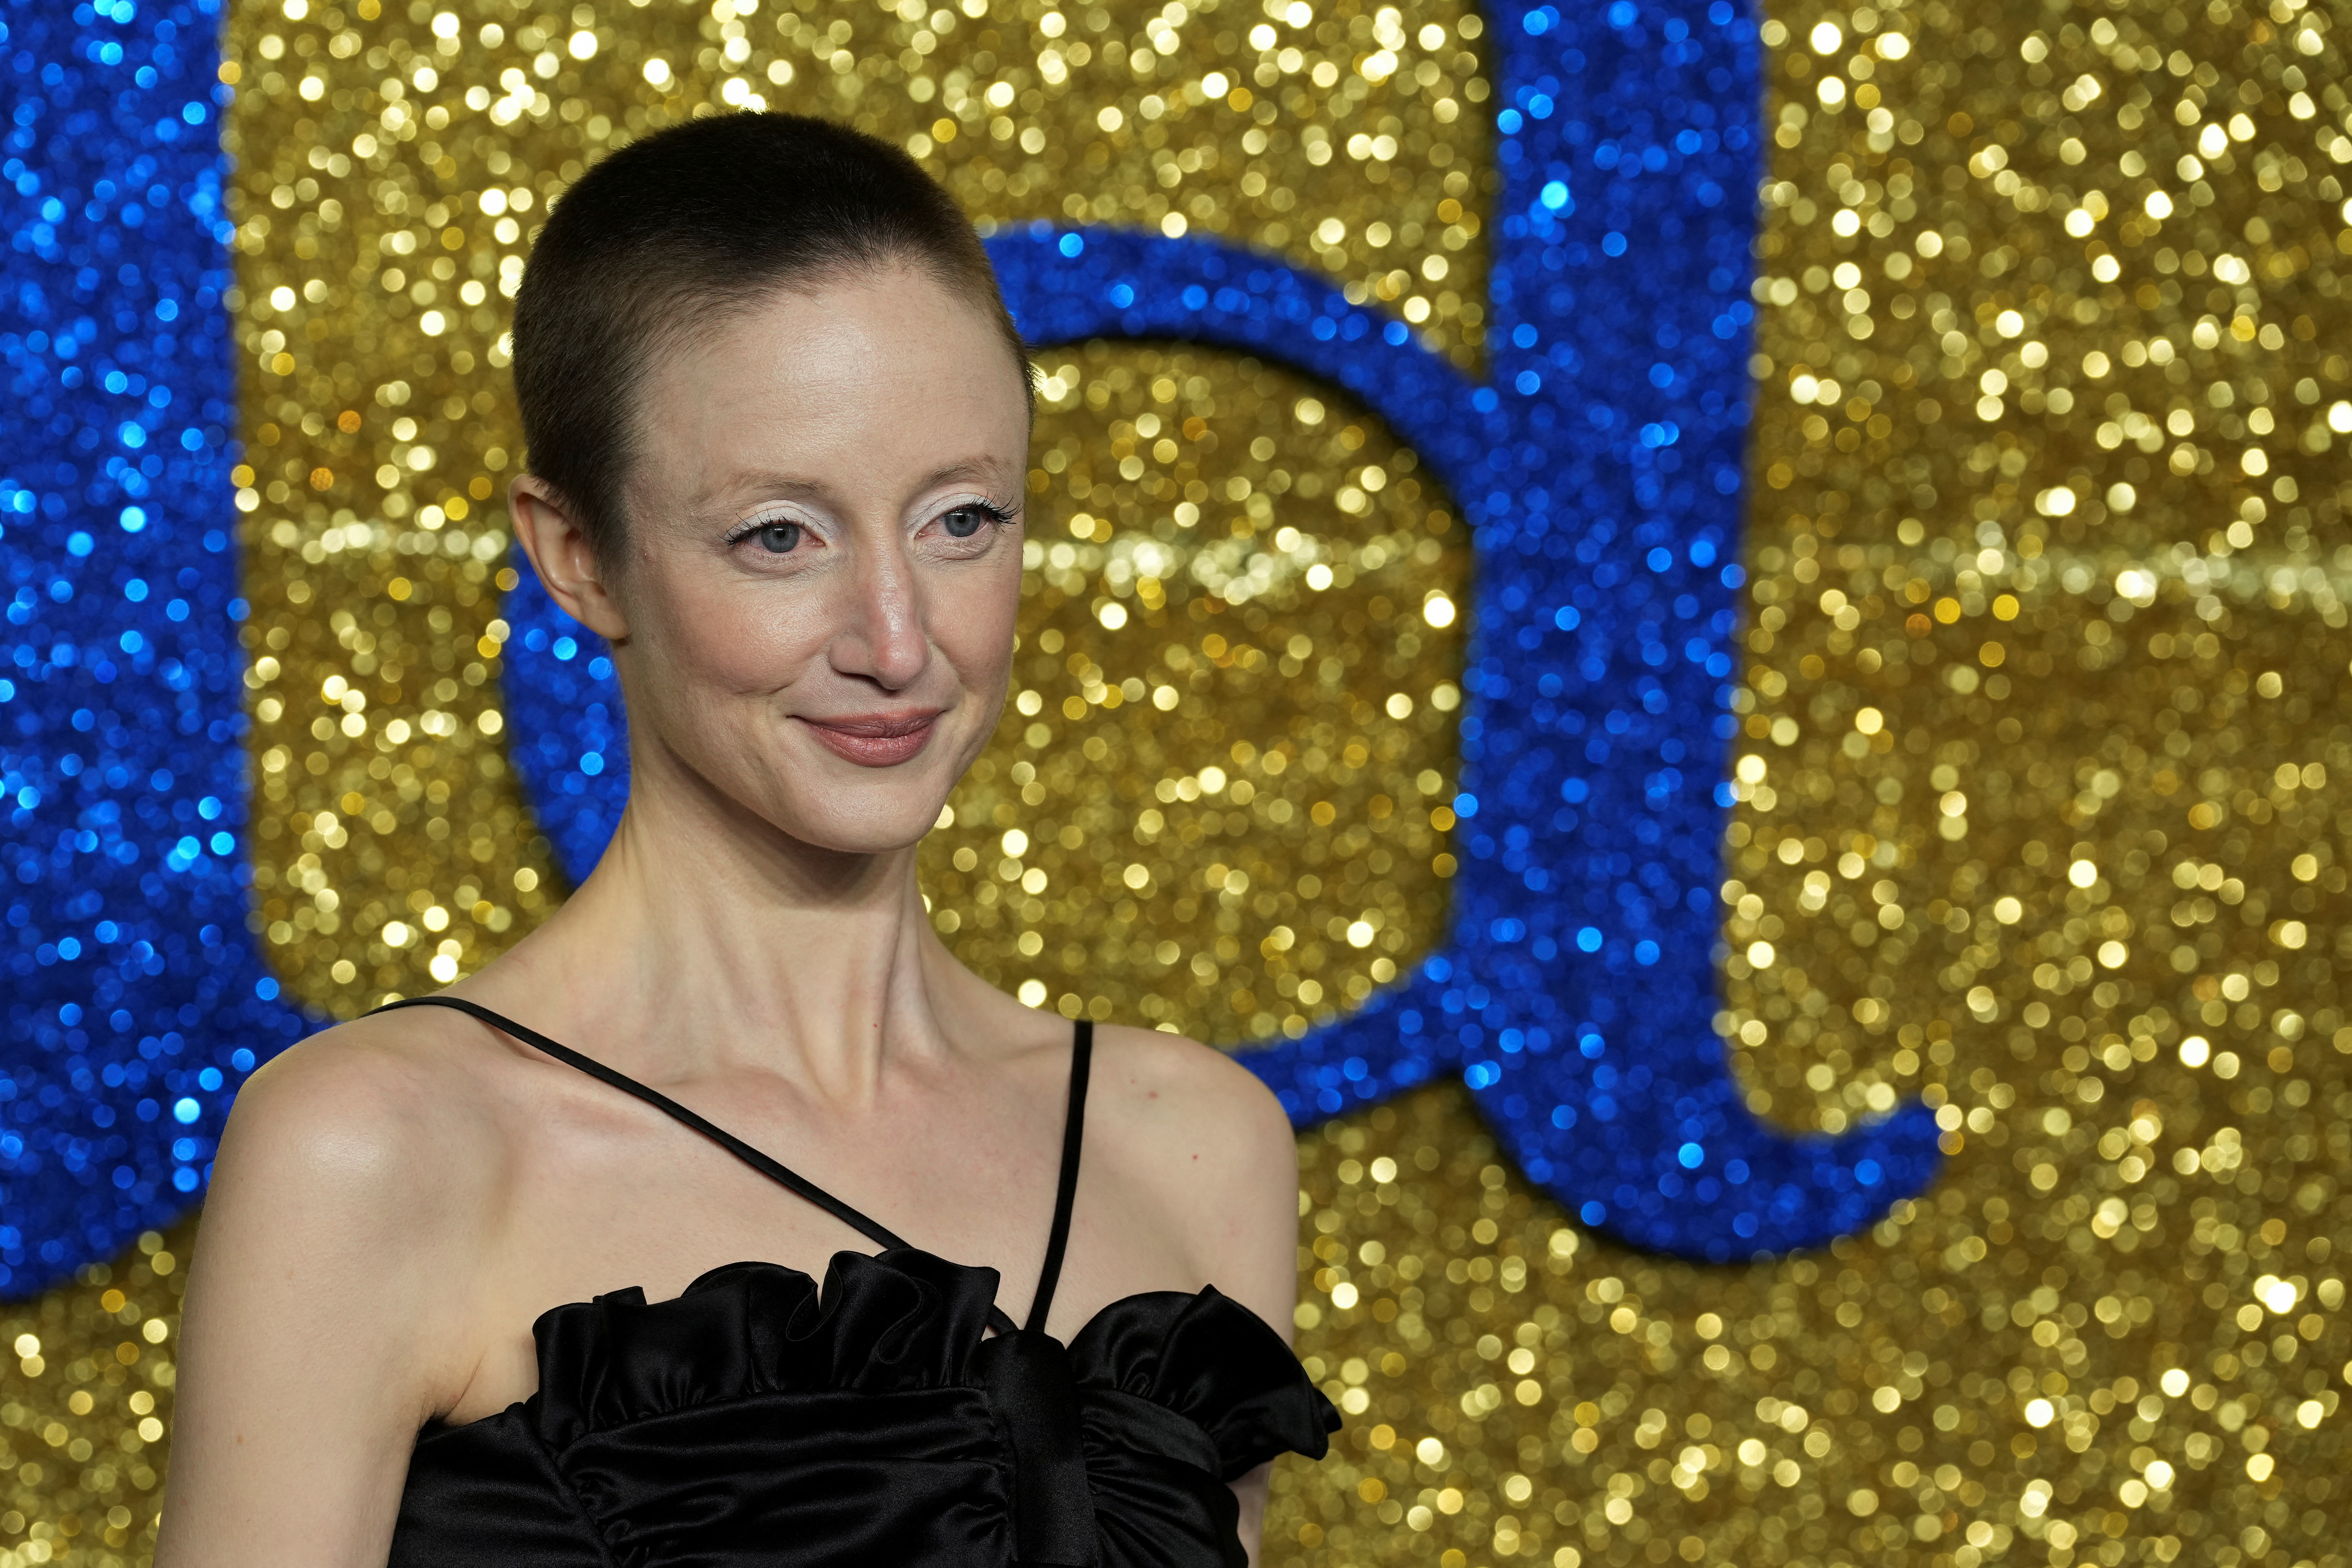 Andrea Riseborough's nomination for best actress at the 2023 Oscars surprised the film industry (REUTERS / Maja Smiejkowska)